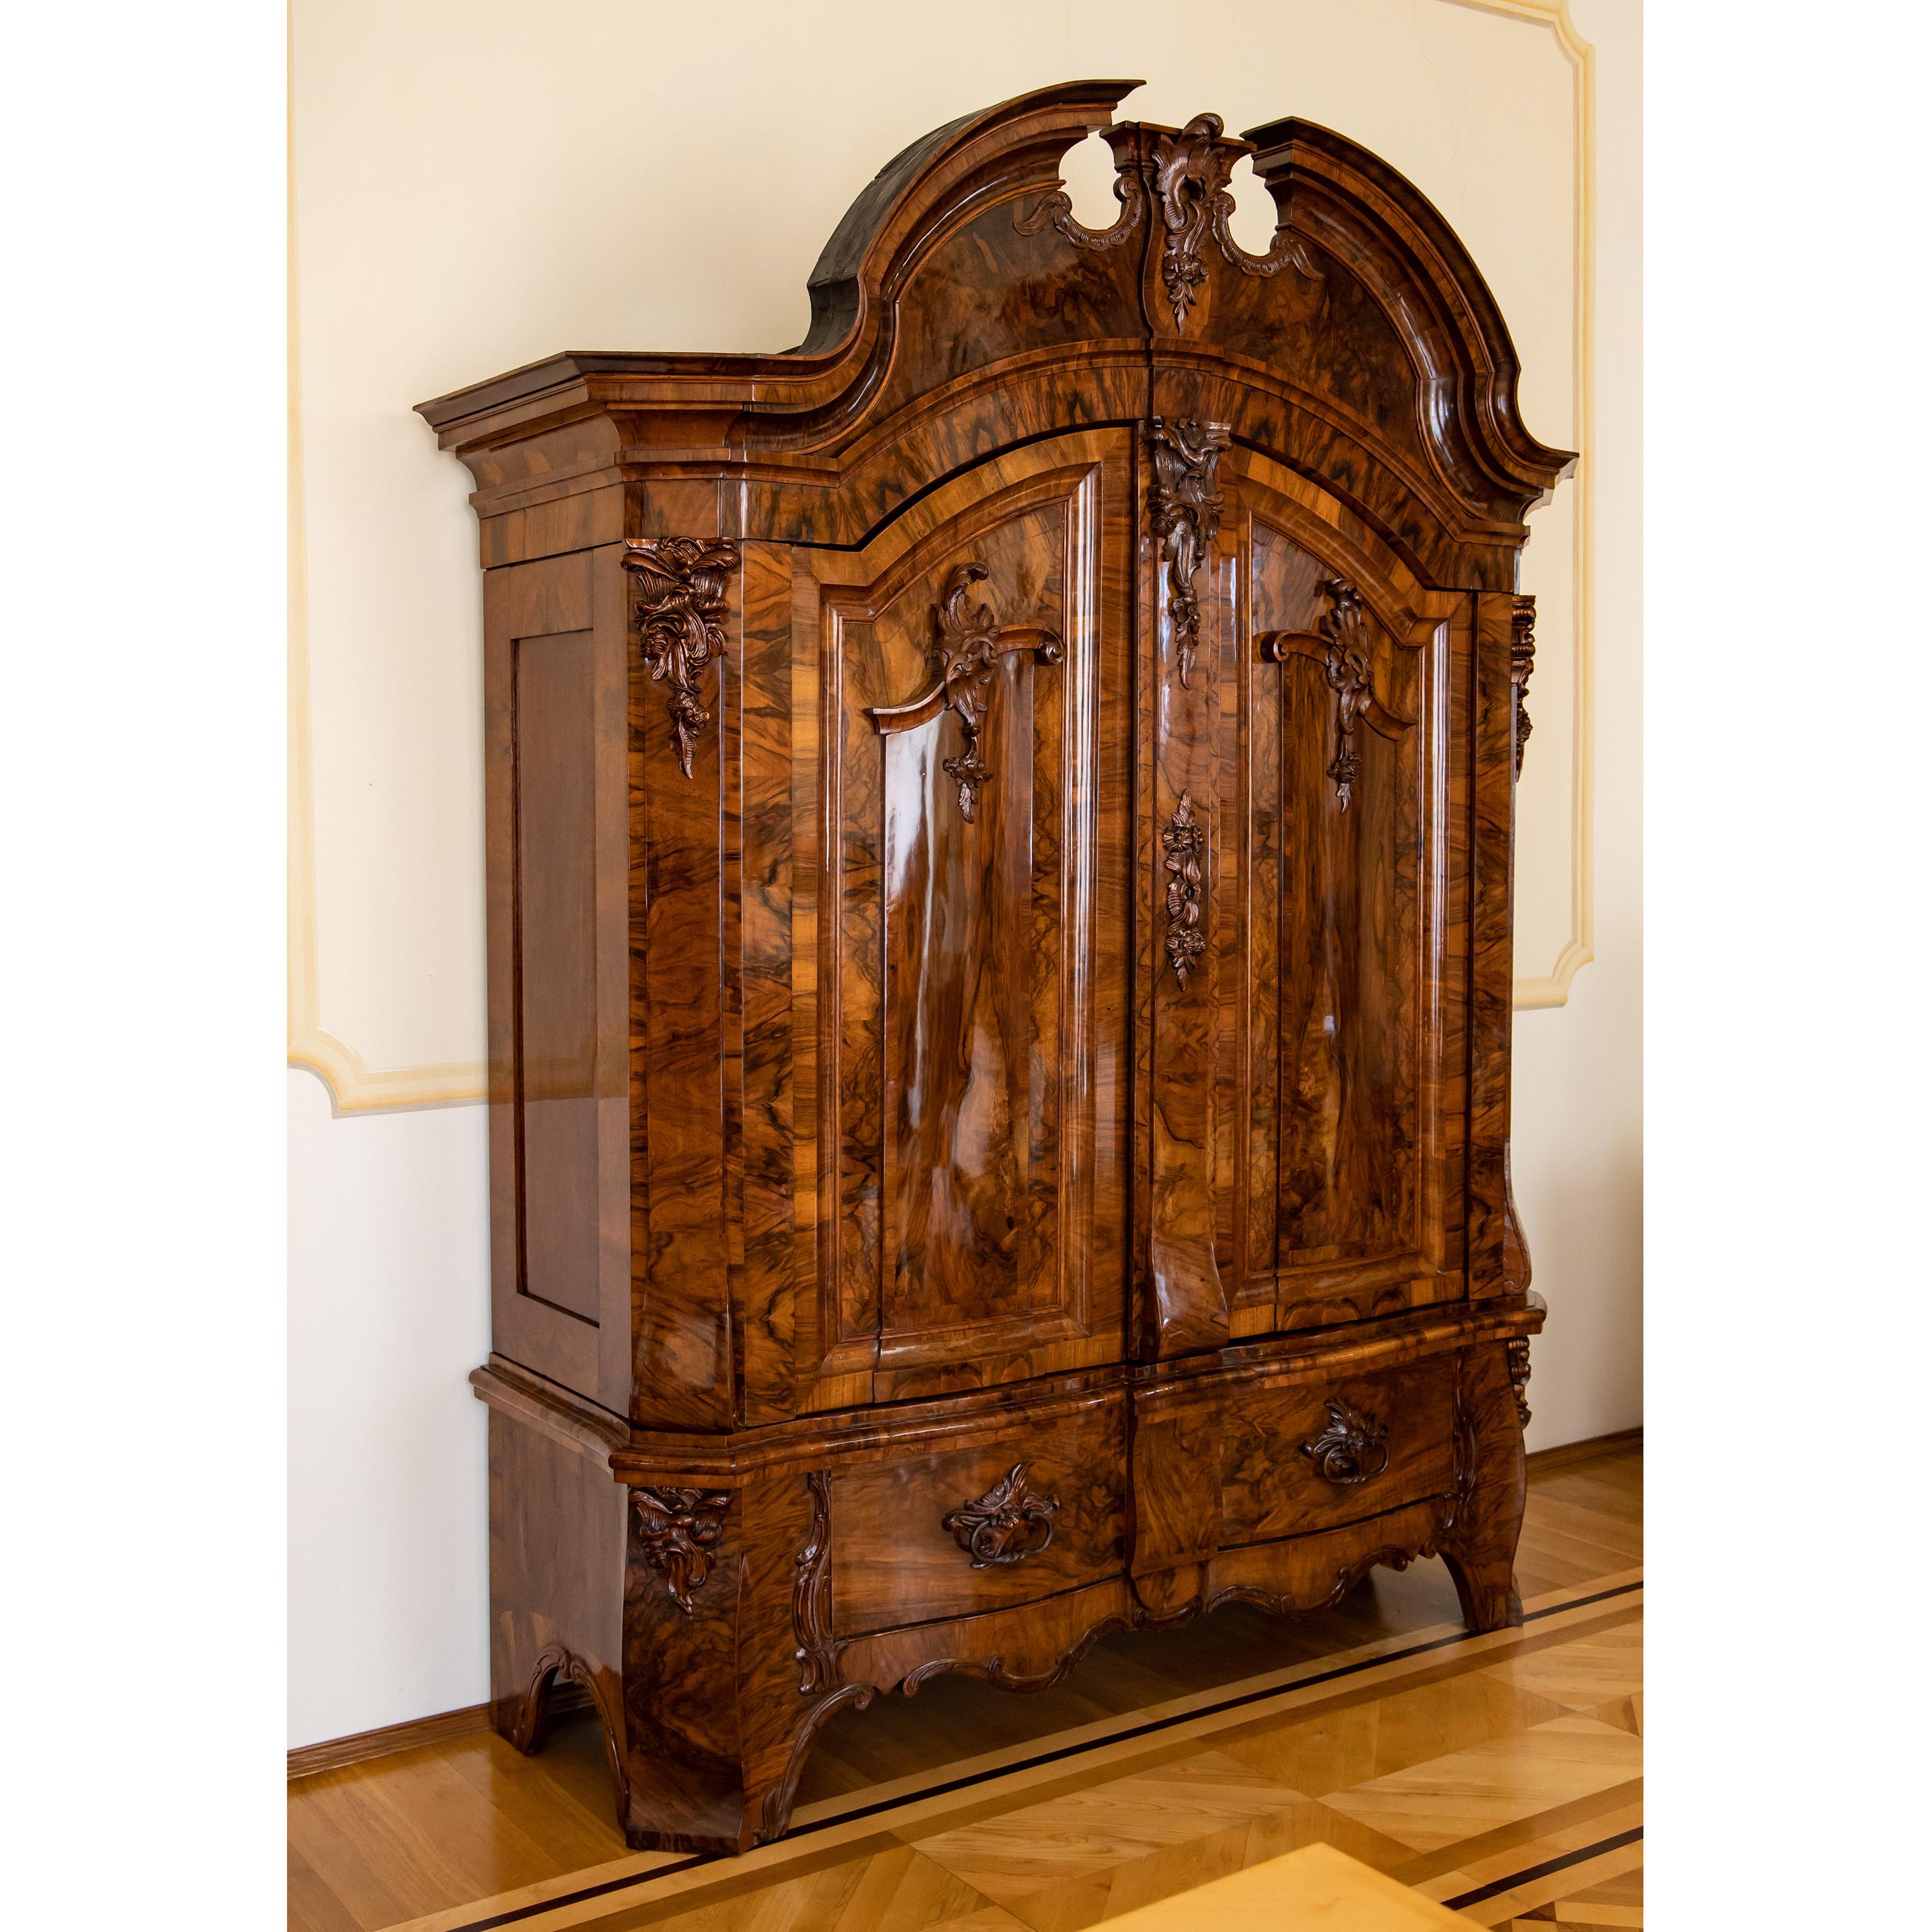 Large courtly hall cupboard with tall swan's neck pediment, bevelled corners and strongly pronounced plinth zone with two drawers and a multiple curved frame. The front is slightly wavy, the fillings of the doors are profiled and close arcade-like.